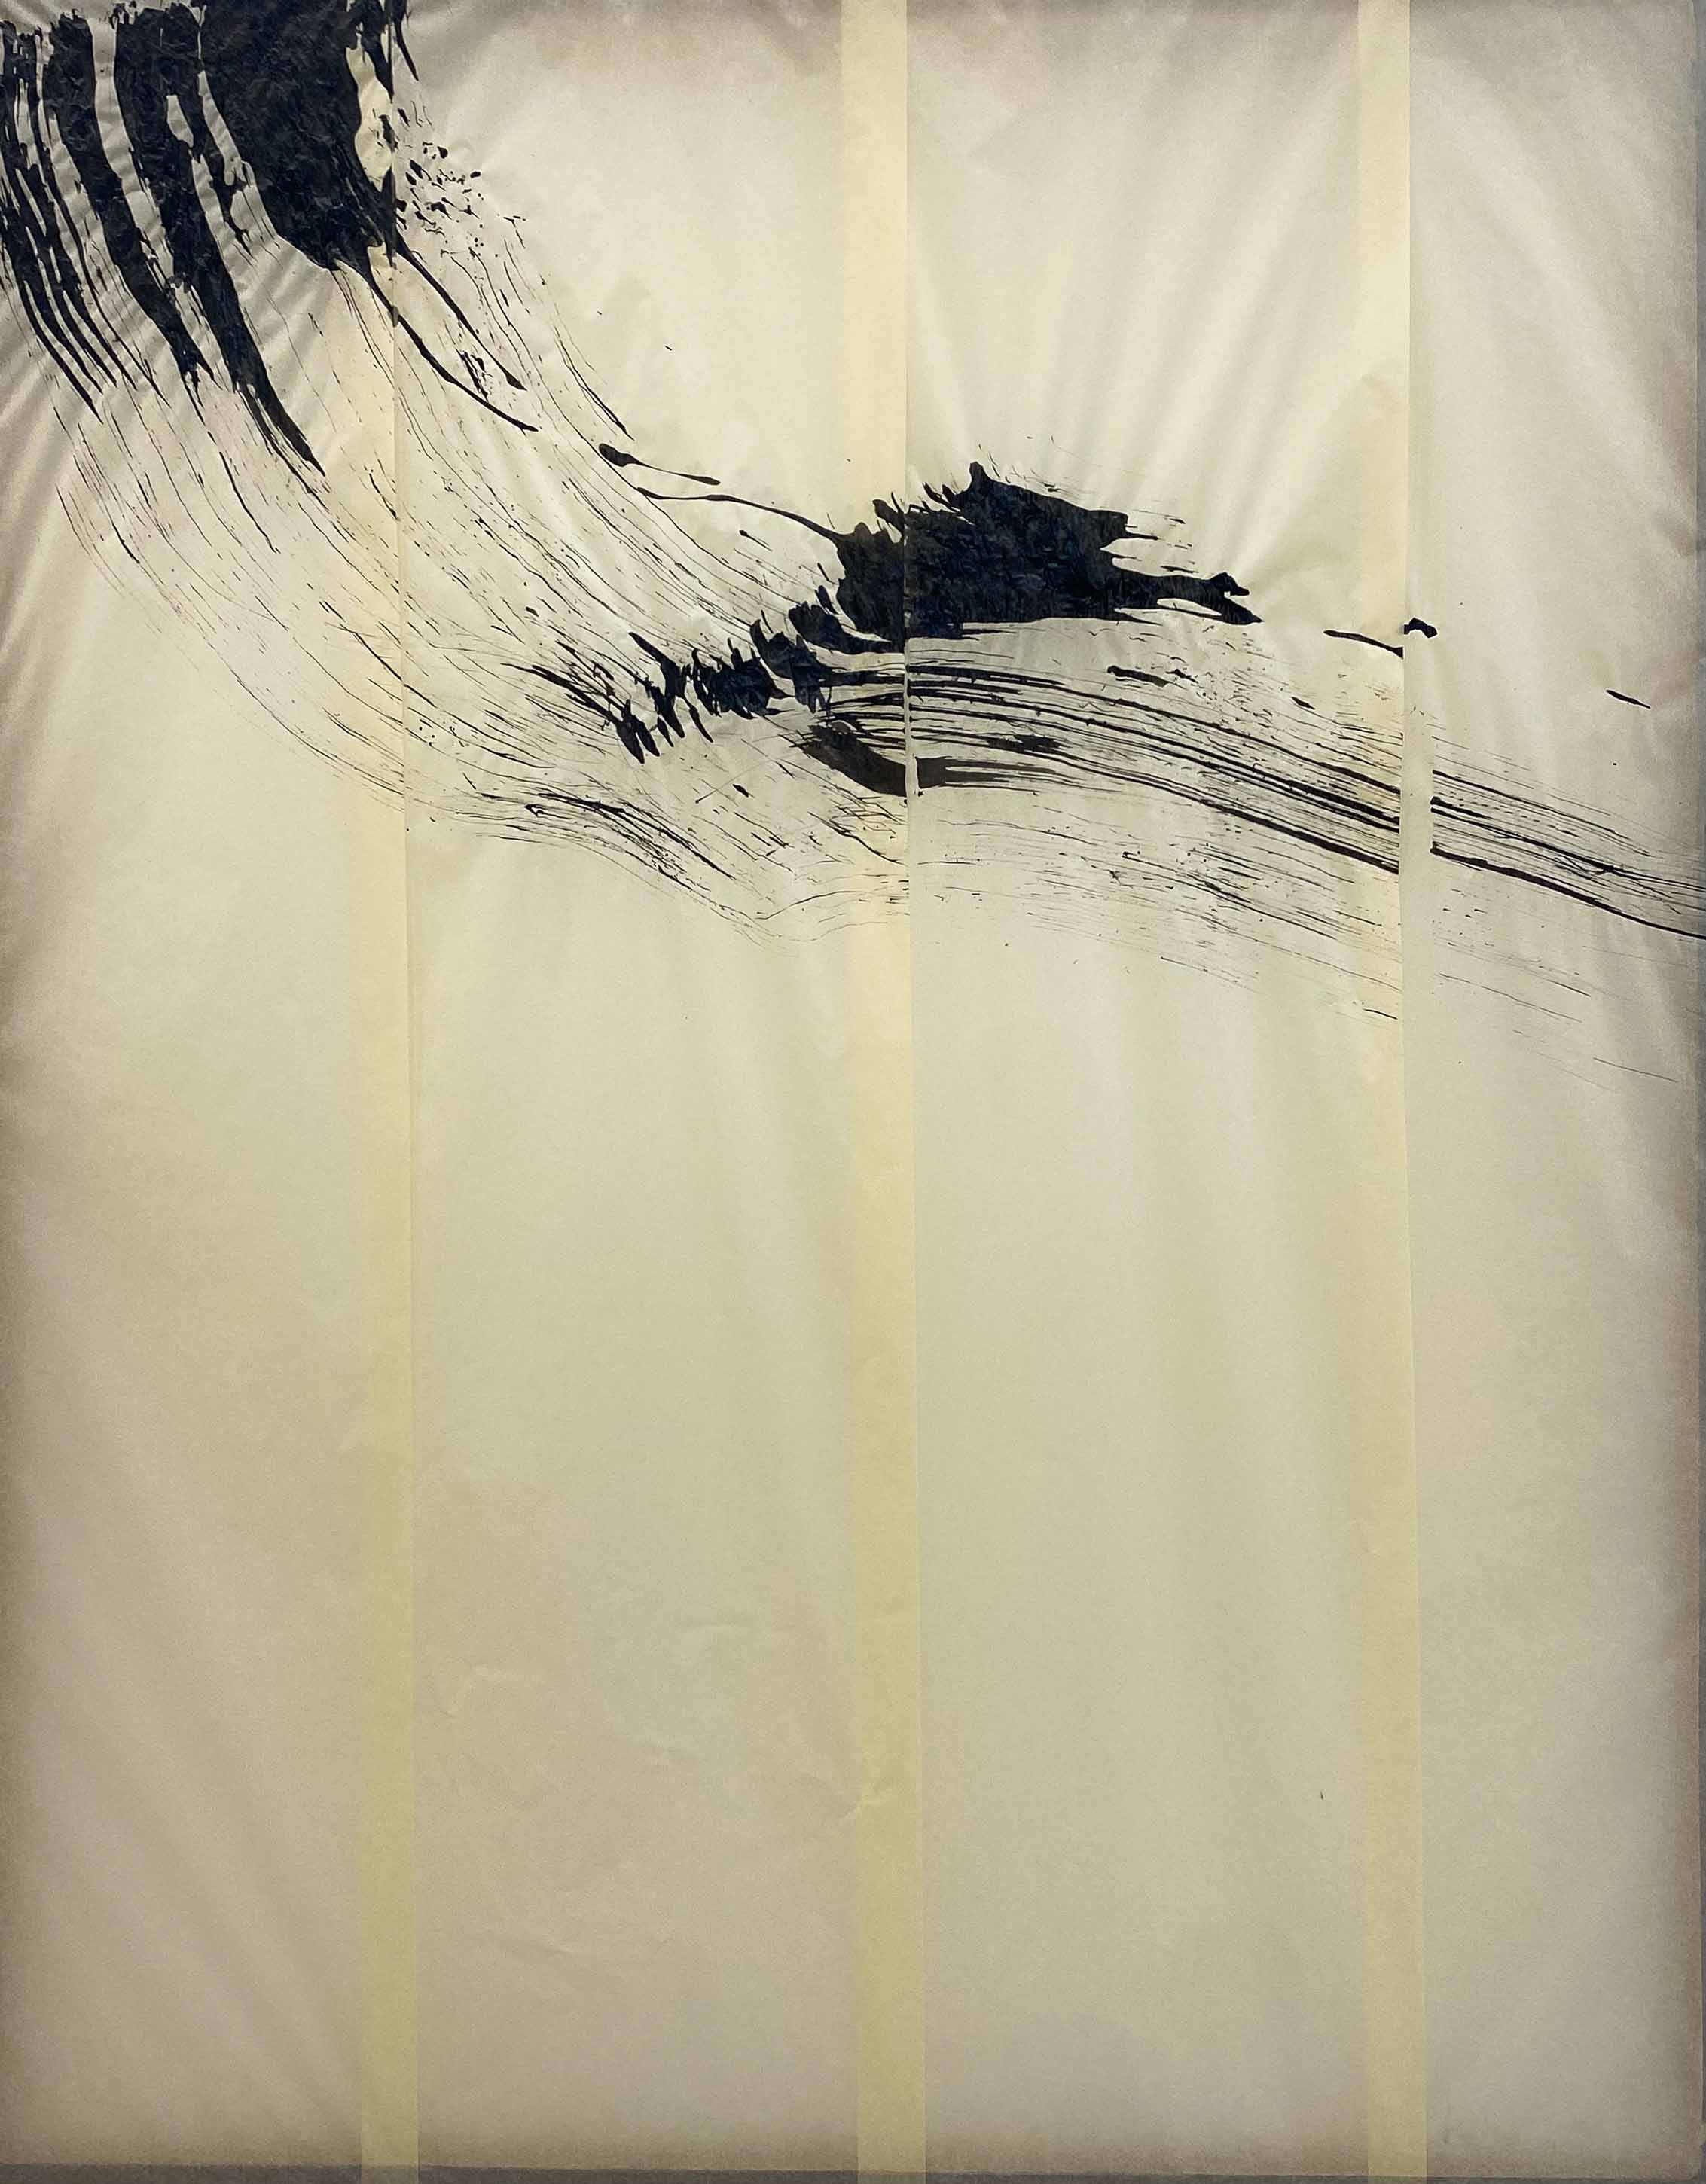 Photo of a painting made out of thin paper with an ink gesture